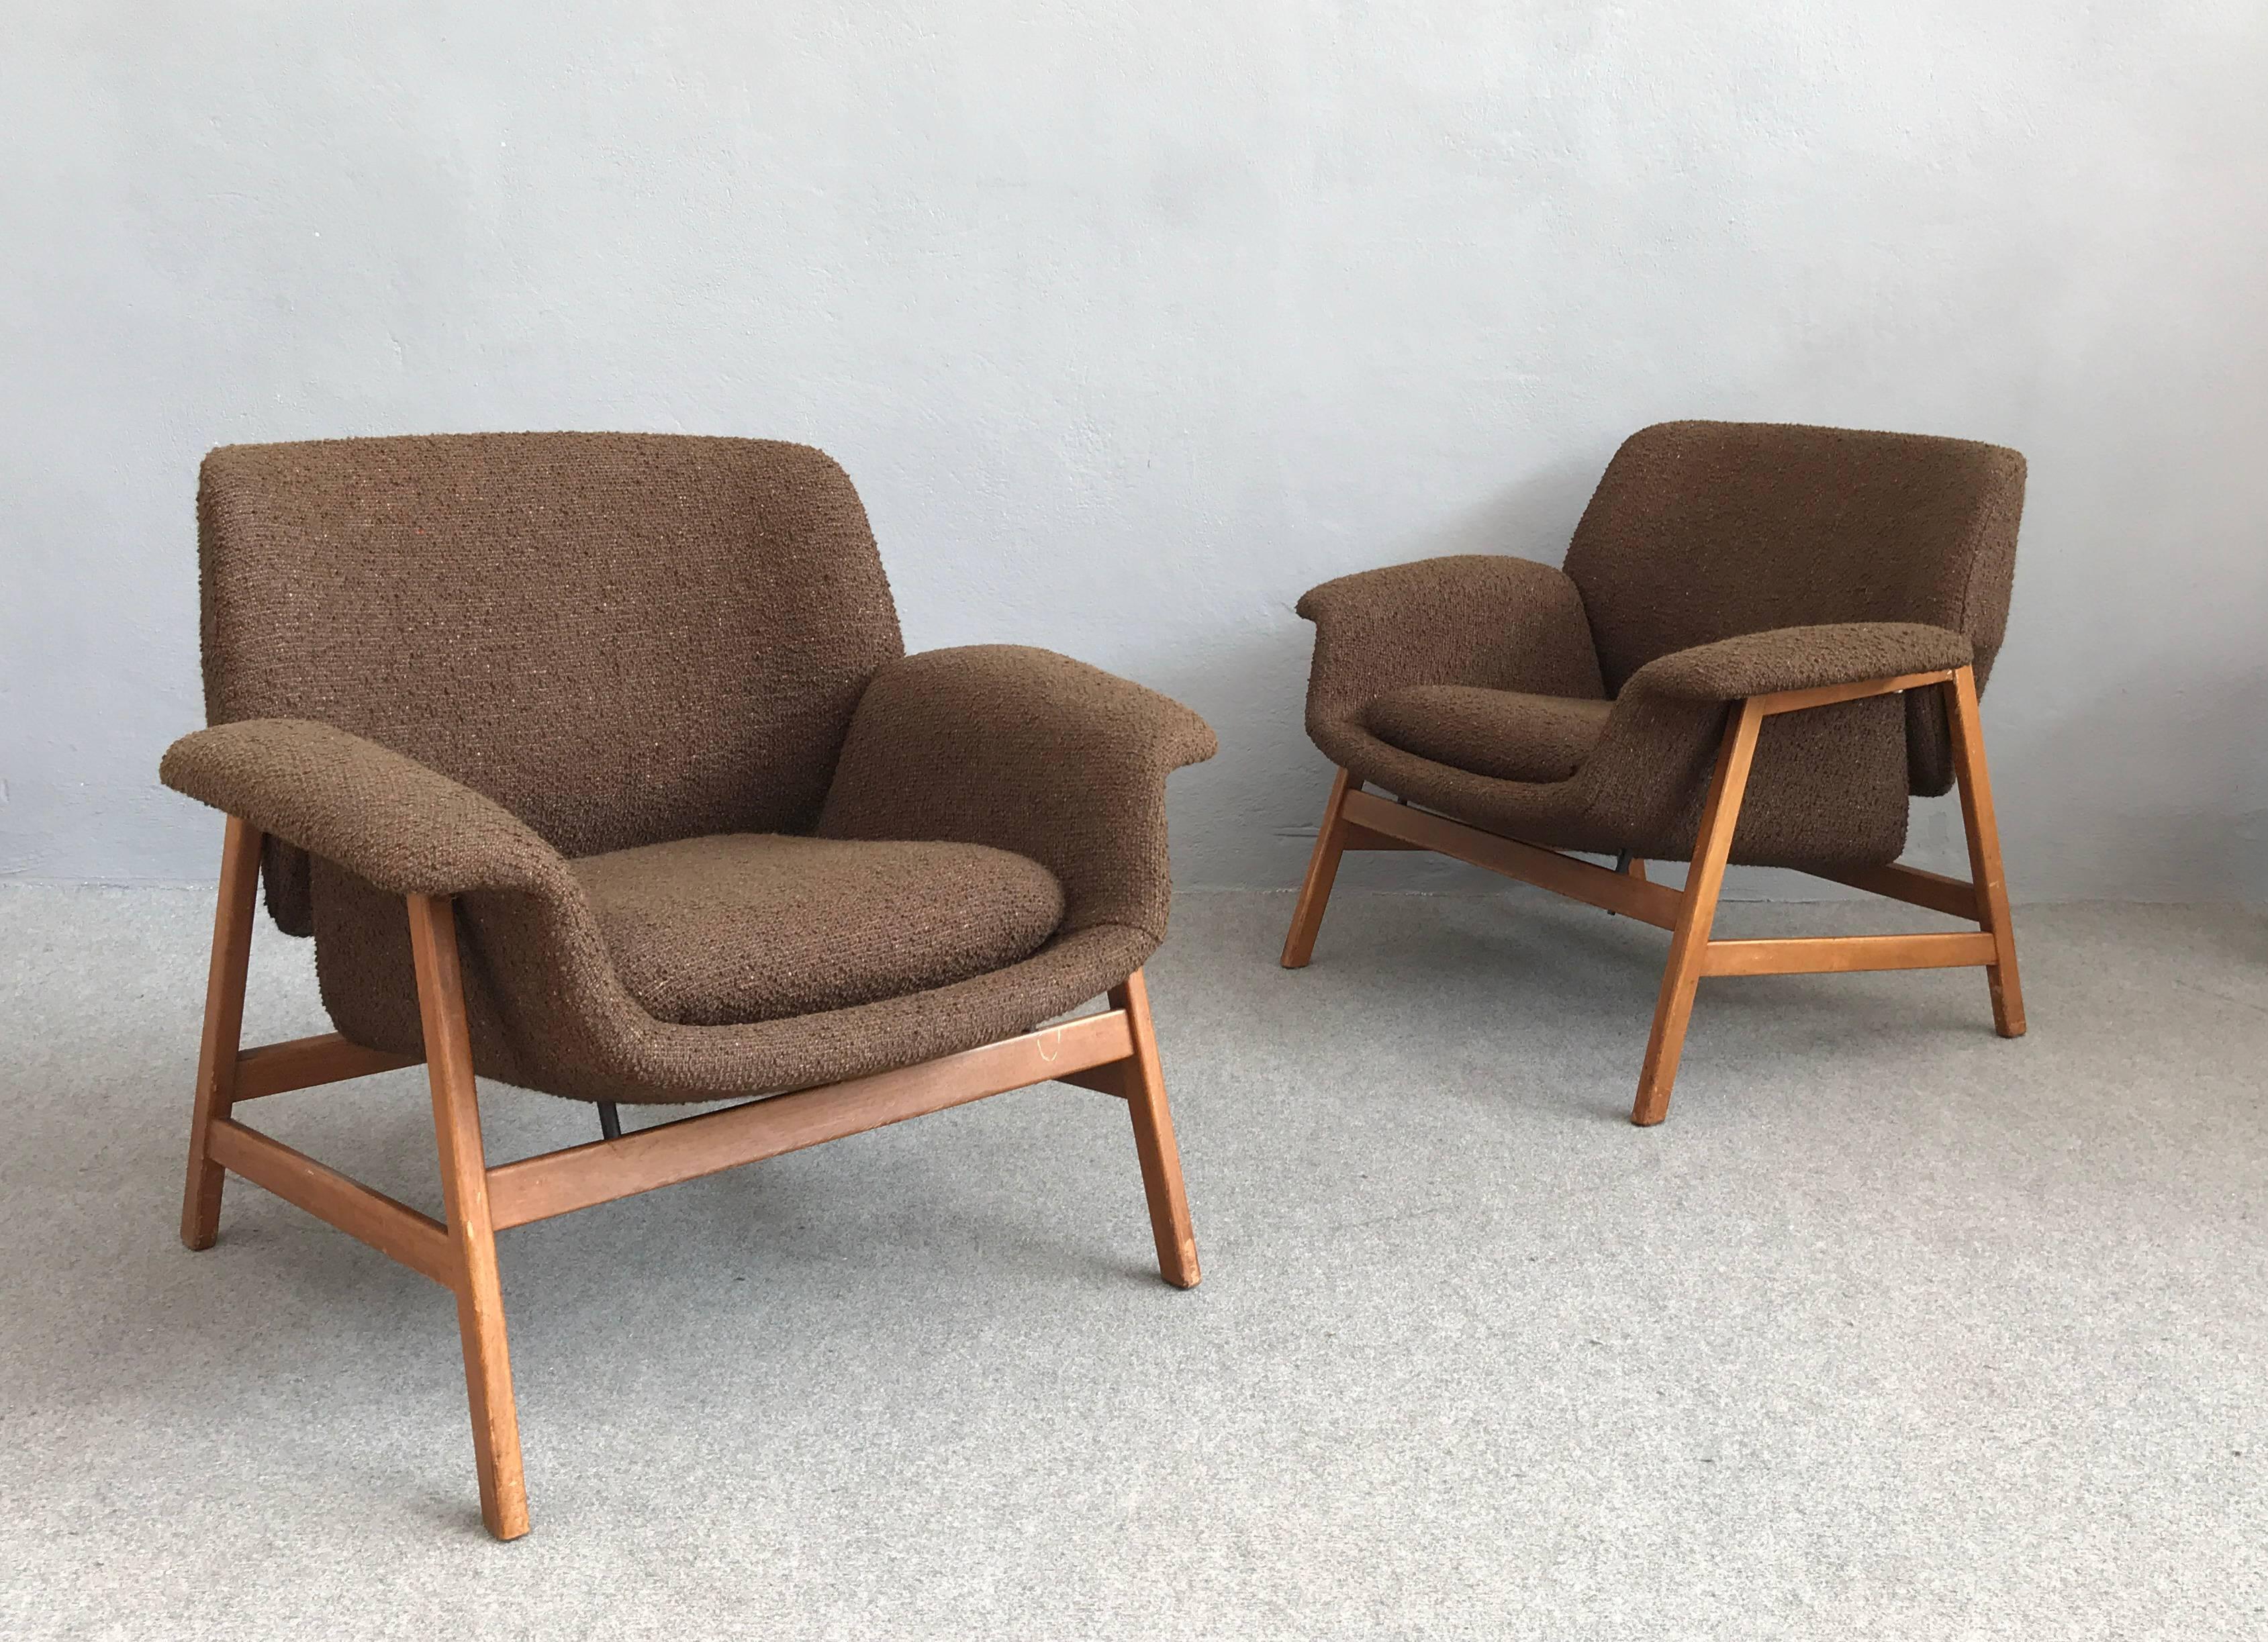 Iconic pair of 849 chairs designed by Gianfranco Frattini for Cassina in 1956. Compasso d'oro winner in 1956.
Perfect vintage condition with original bouclè wool fabric. Label Figli di Amedeo Cassina.